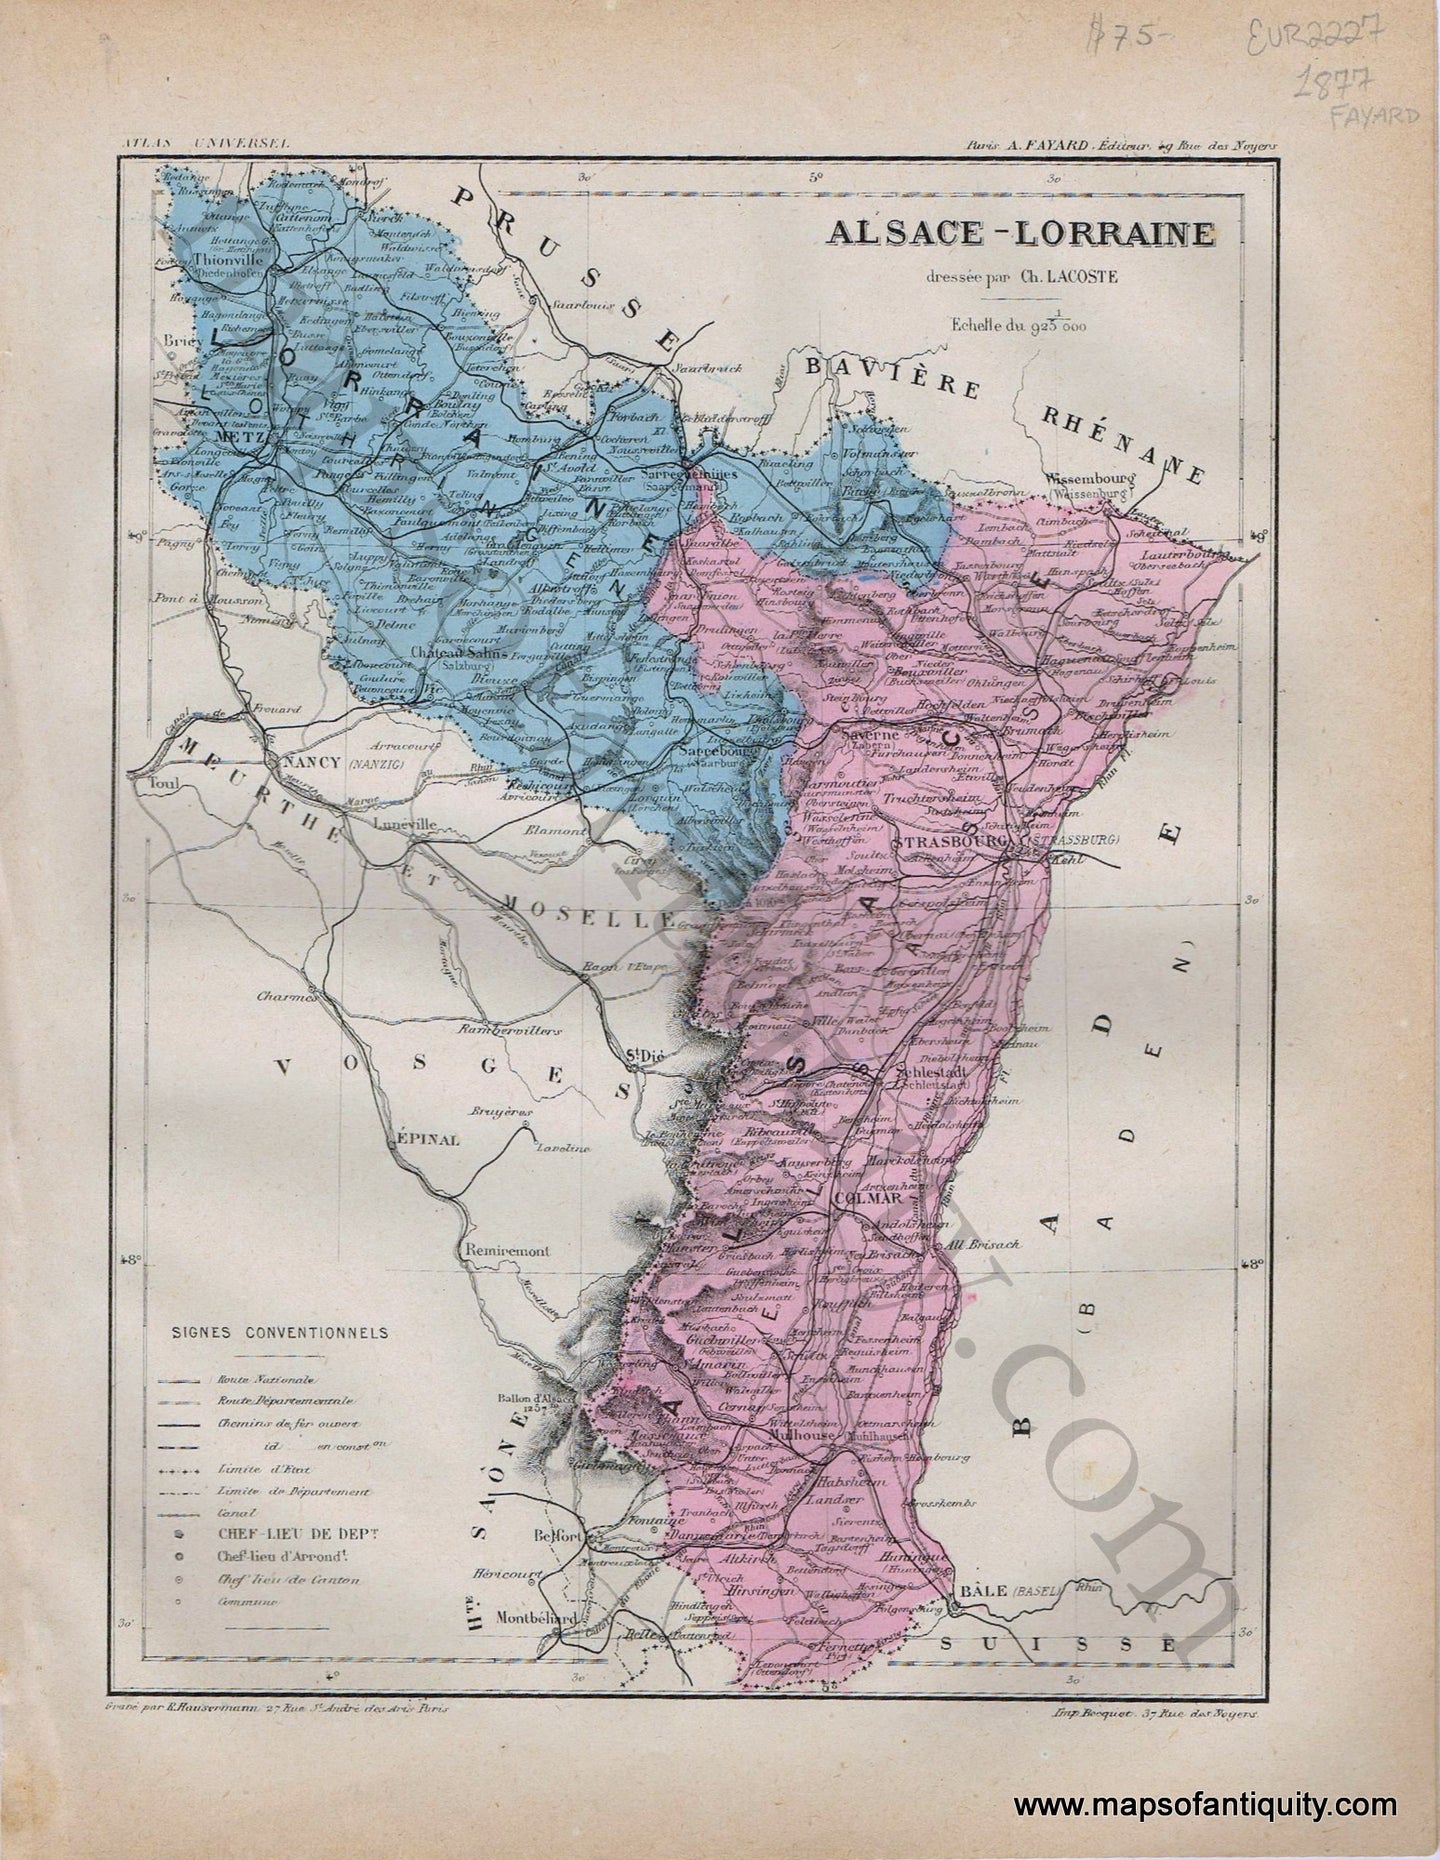 Antique-Map-Alsace-Lorraine-Imperial-Territory-German-Empire-Germany-France-Prussian-War-History-France-Fayard-Atlas-Universel-French-1877-1870s-1800s-Mid-Late-19th-Century-Maps-of-Antiquity